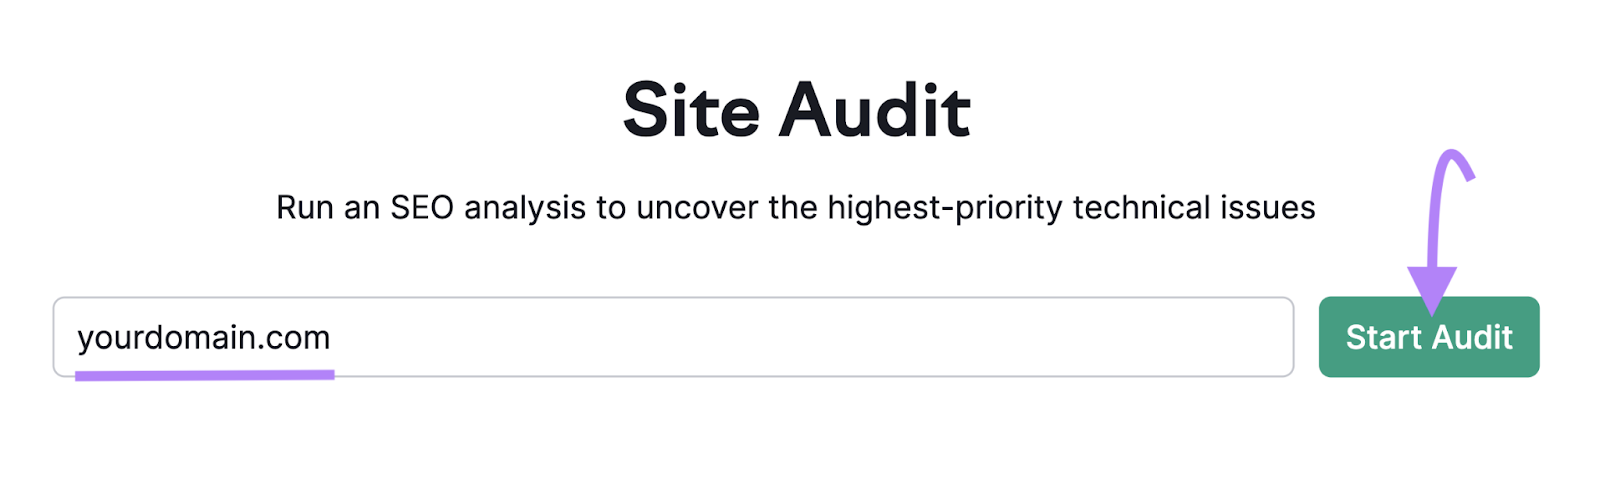 Enter domain name in Site Audit search bar